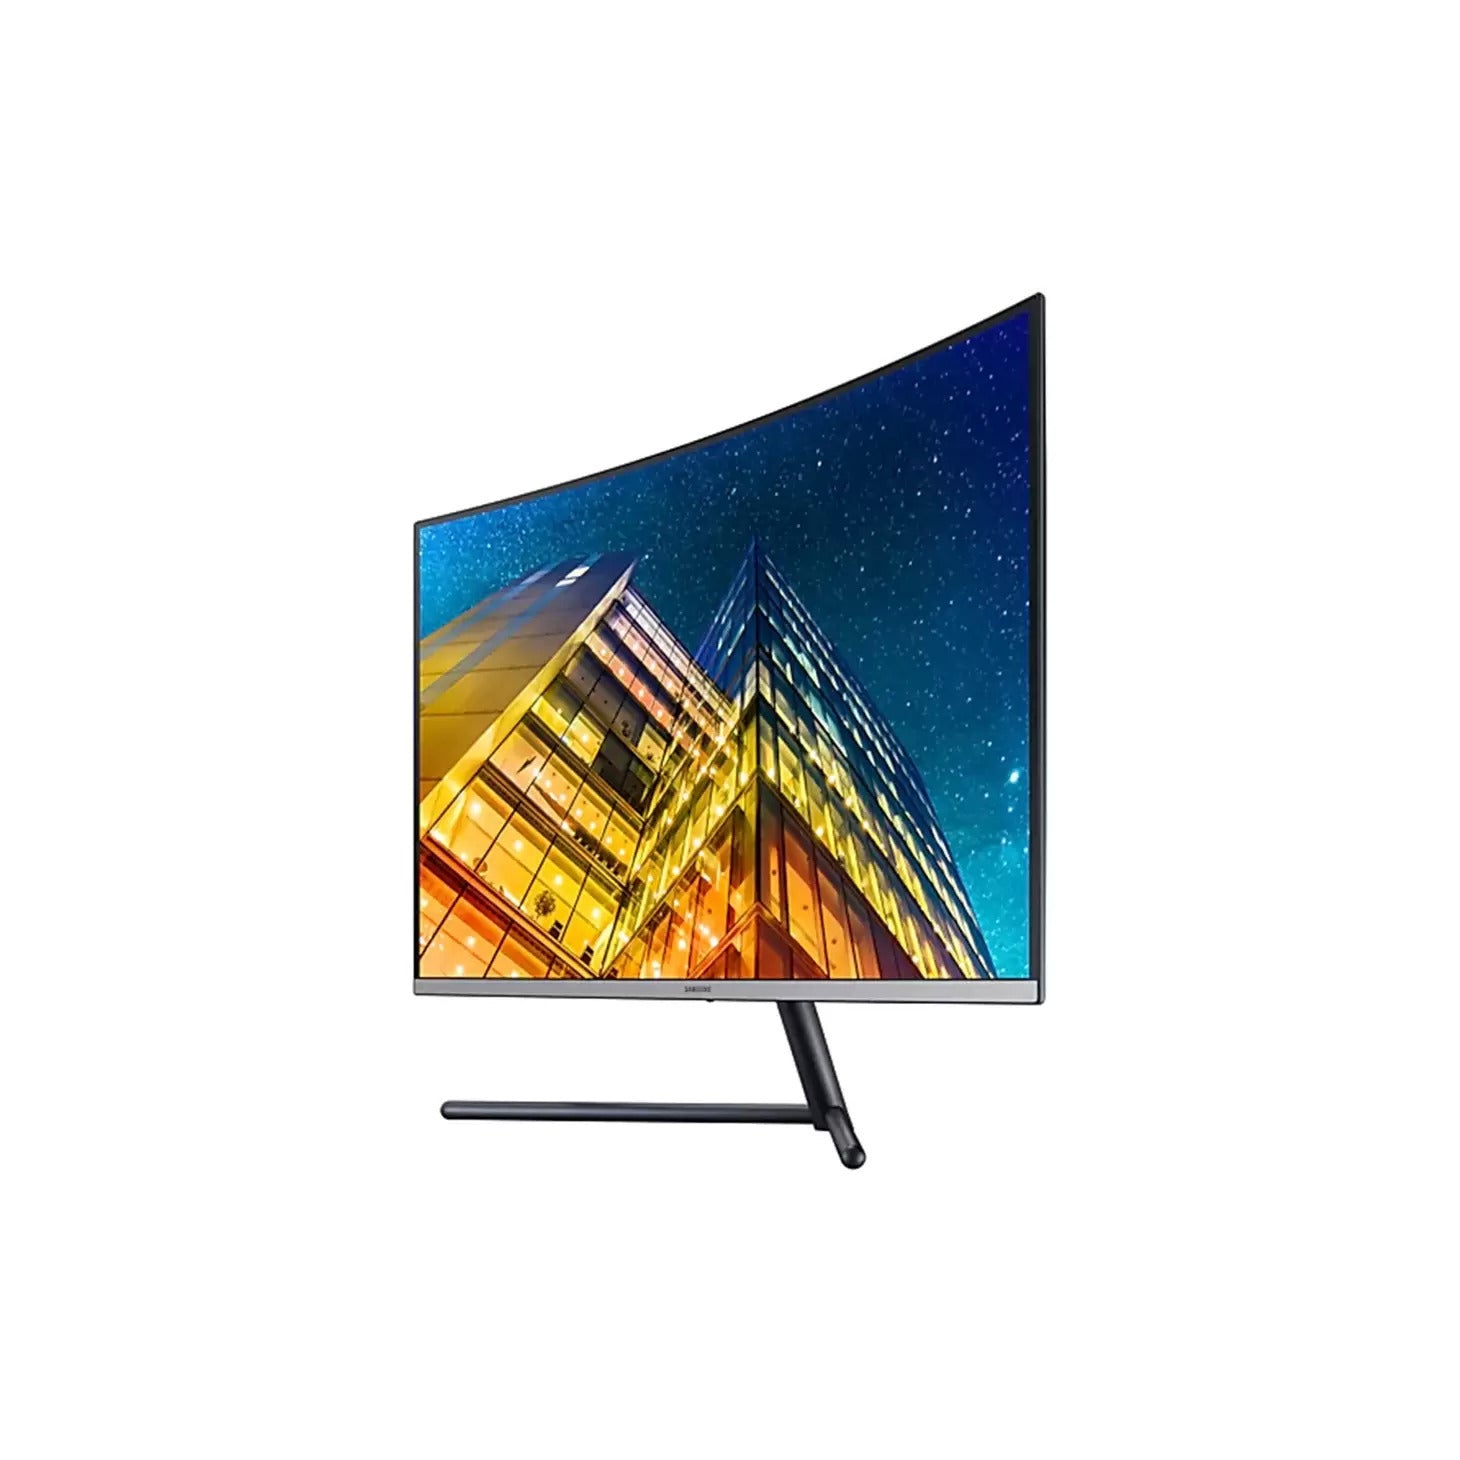 Samsung 31.5" UHD Curved monitor with 1 billion colours - New